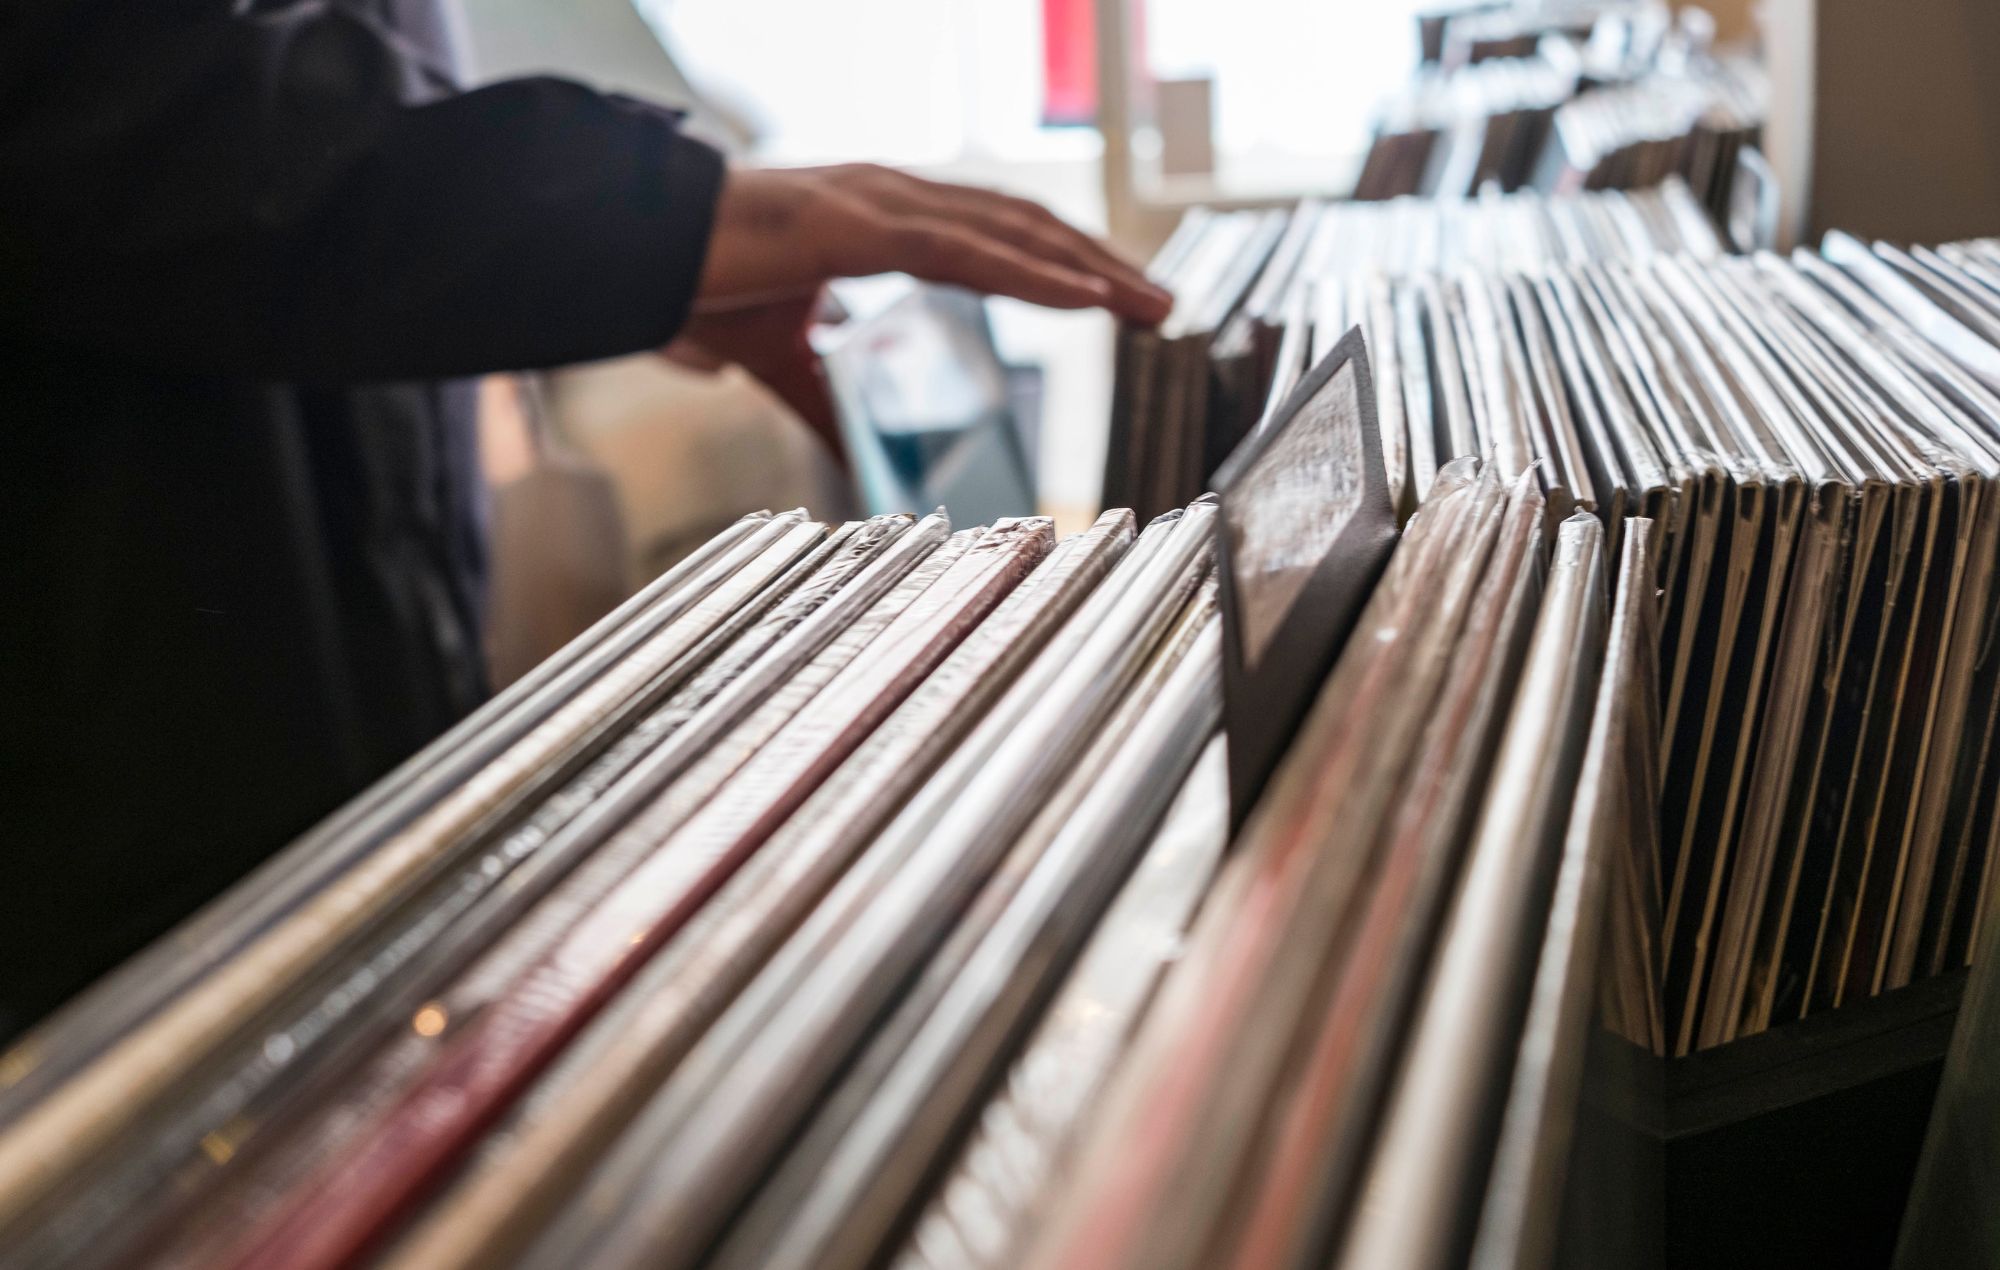 Our Price share more details of their plan to relaunch iconic music store